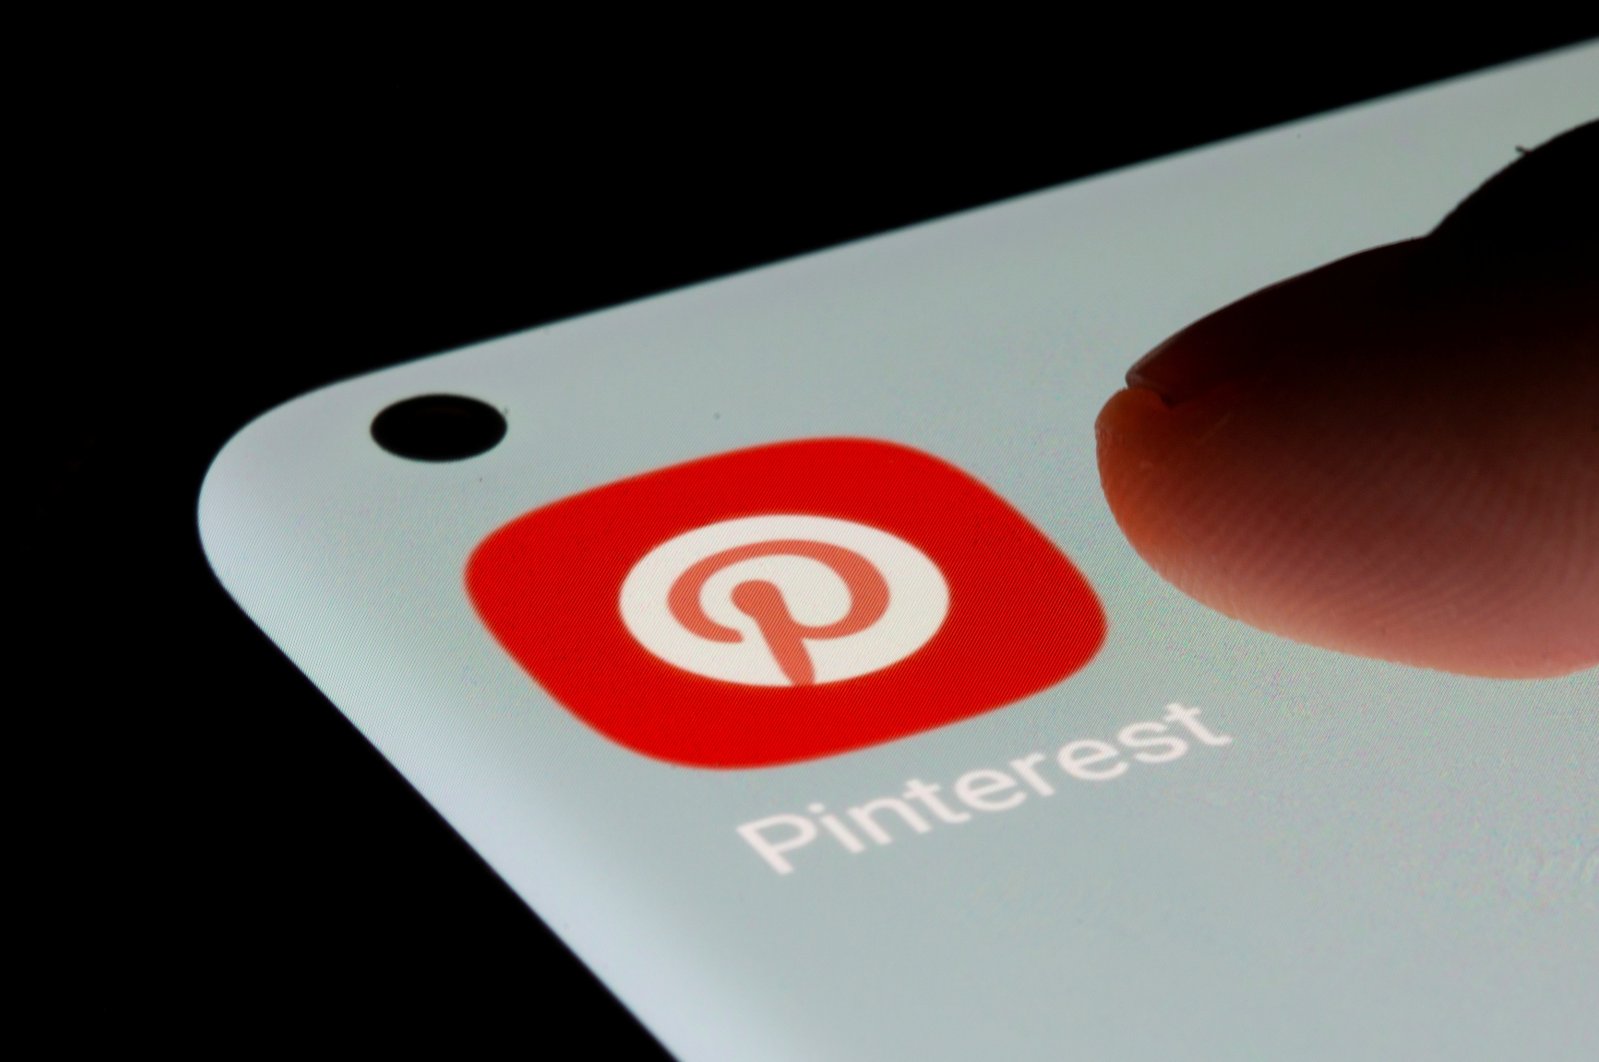 The Pinterest app is seen on a smartphone in this illustration created on July 13, 2021. (Reuters Photo)